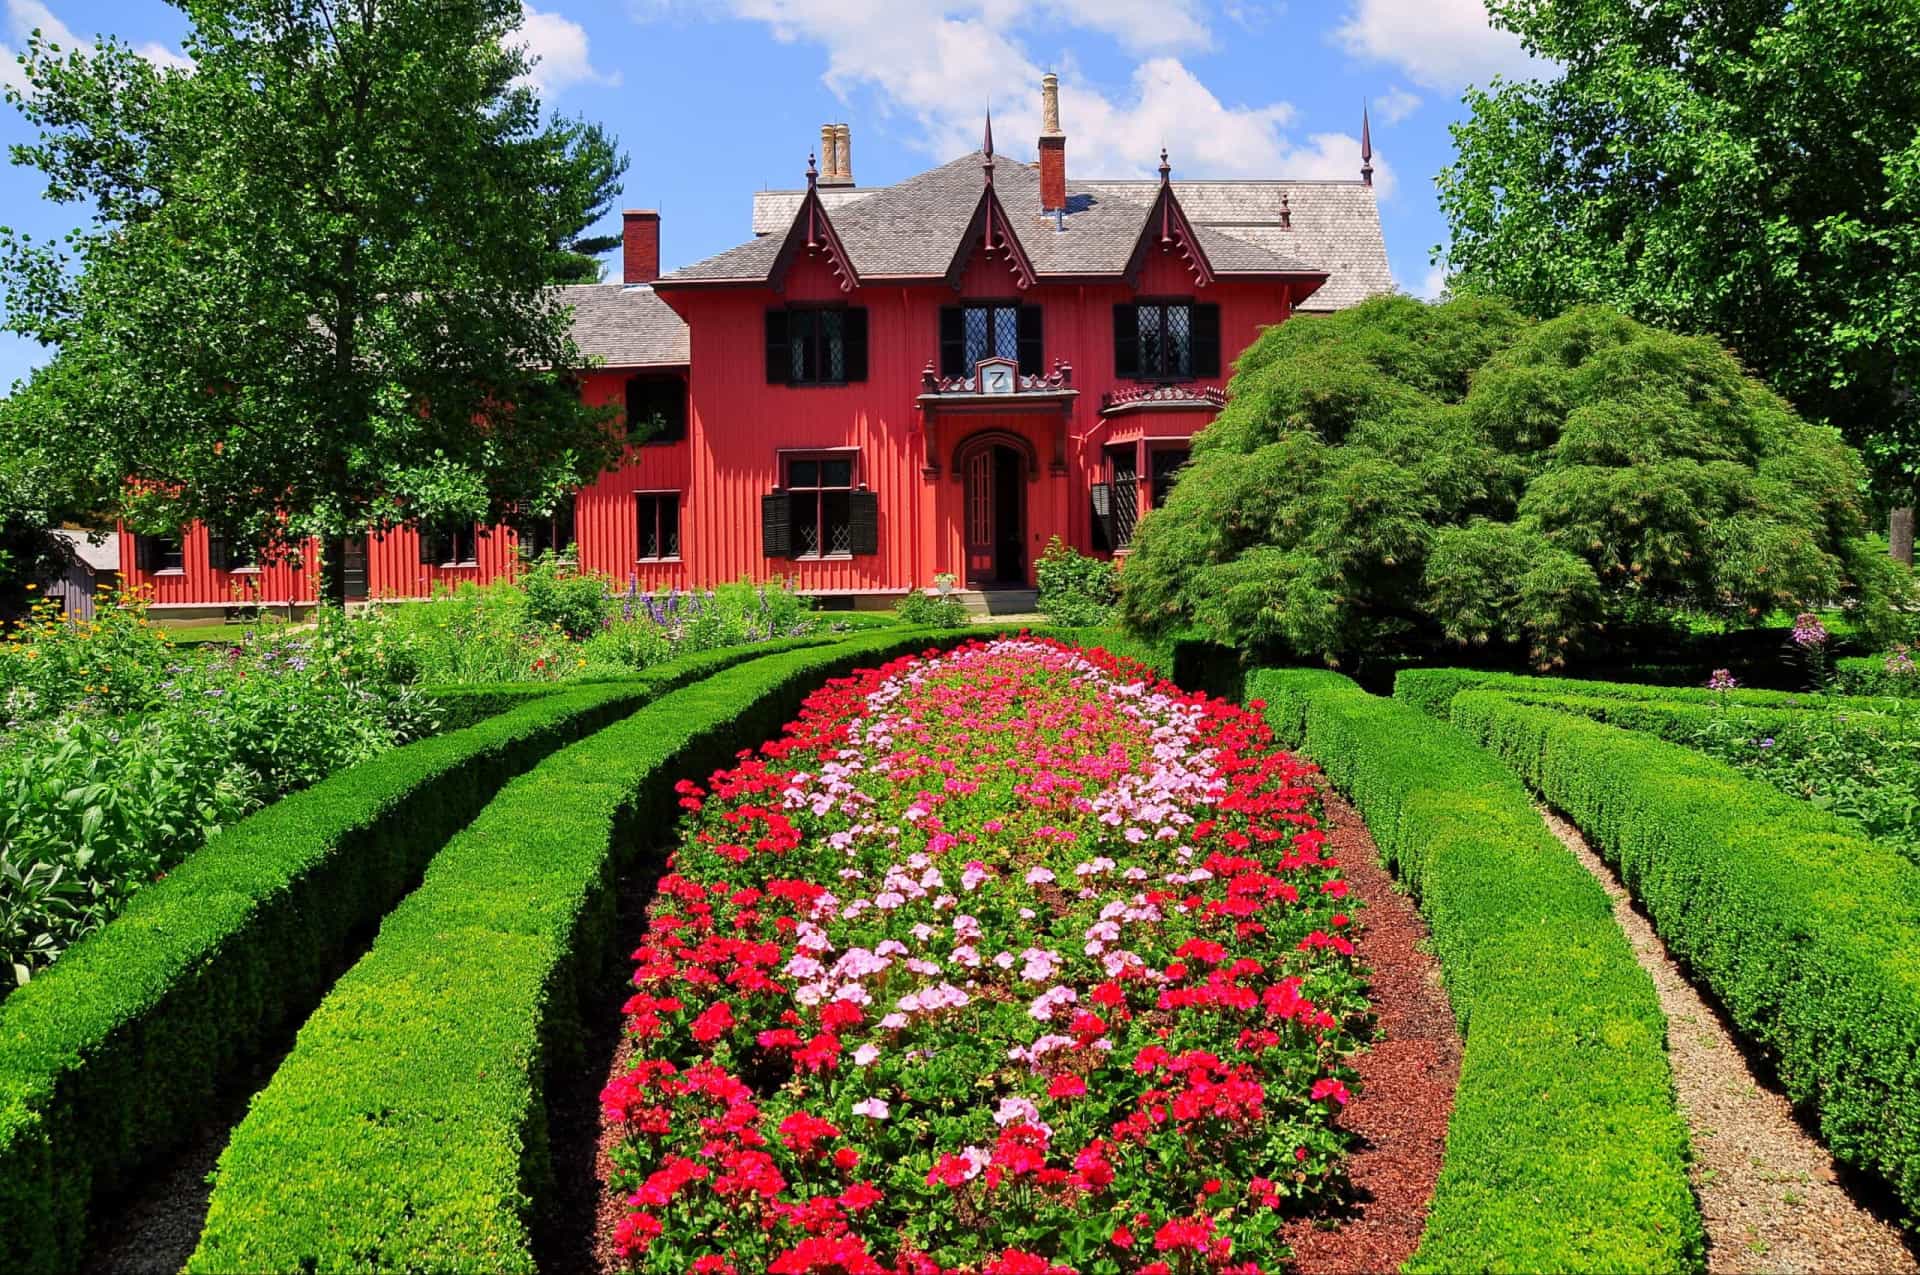 <p>Connecticut positively brims with amazing properties. This residence, also known as the Pink House for obvious reasons, was the summer home of influential 19th-century businessman, philanthropist, and publisher Henry Bowen, his wife Lucy, and their family. The house and gardens are open to the public.</p><p>You may also like: <a href="https://www.starsinsider.com/n/491320?utm_source=msn.com&utm_medium=display&utm_campaign=referral_description&utm_content=513982en-us">The most disturbing parts of the Bible</a></p>